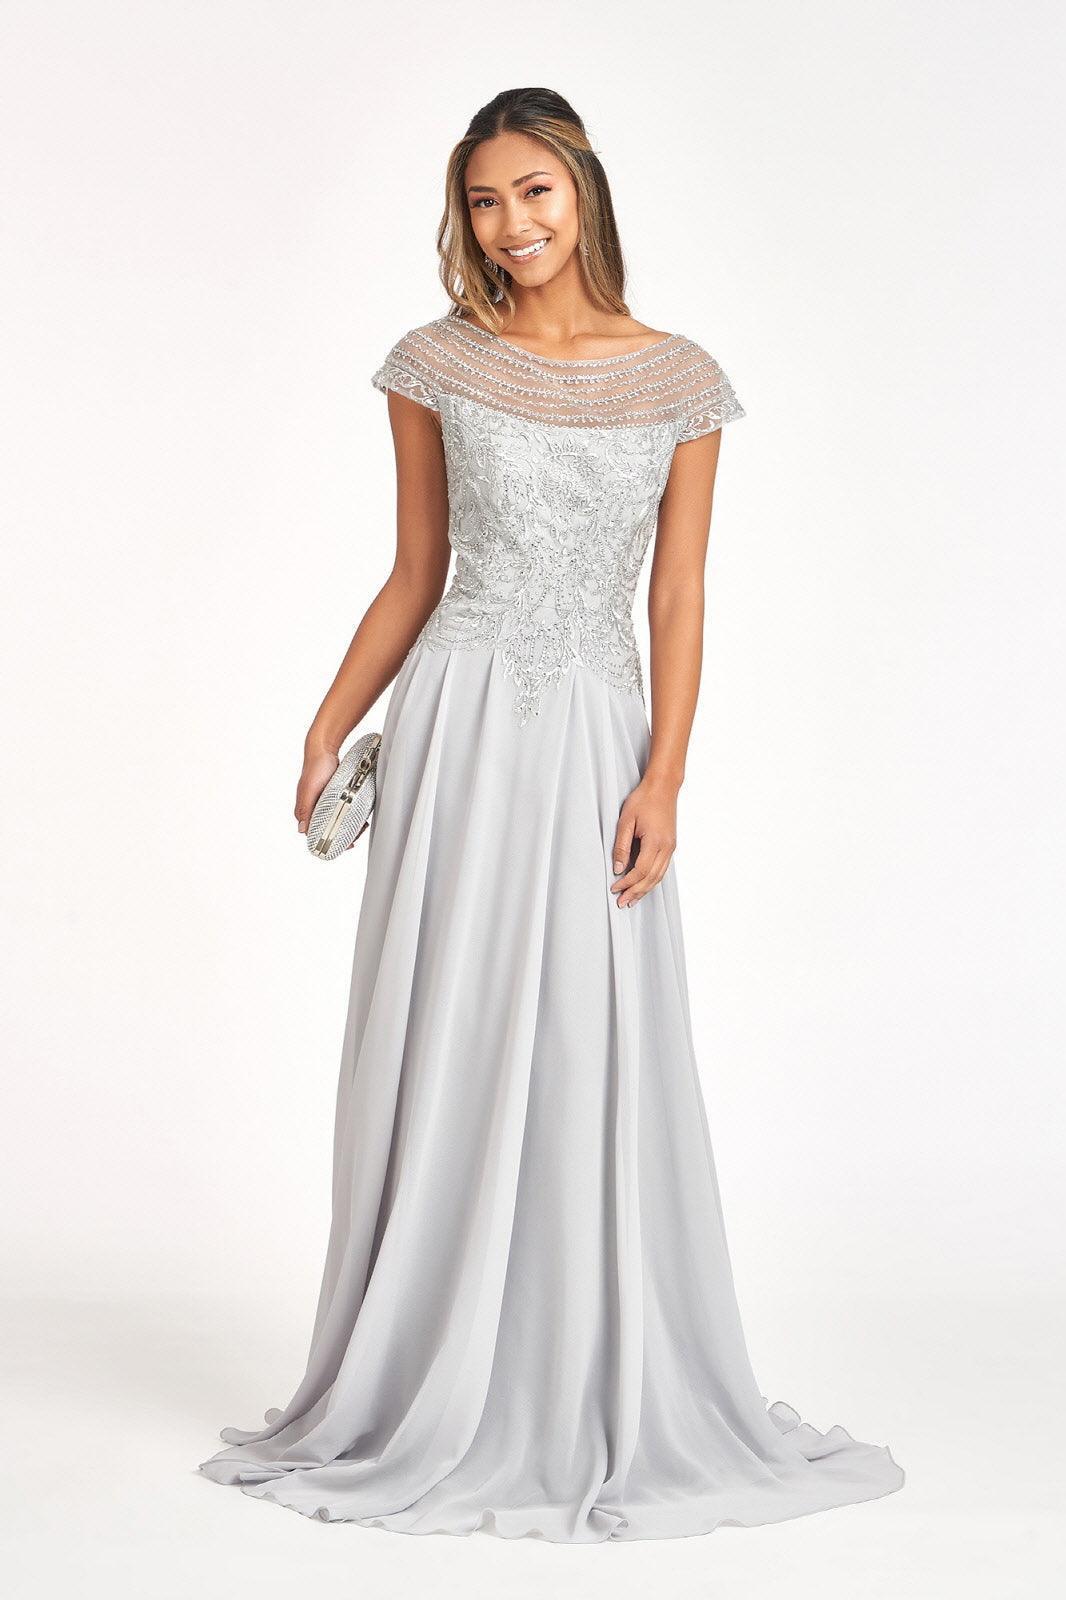 Long Formal Chiffon Mother of the Bride Dress - The Dress Outlet